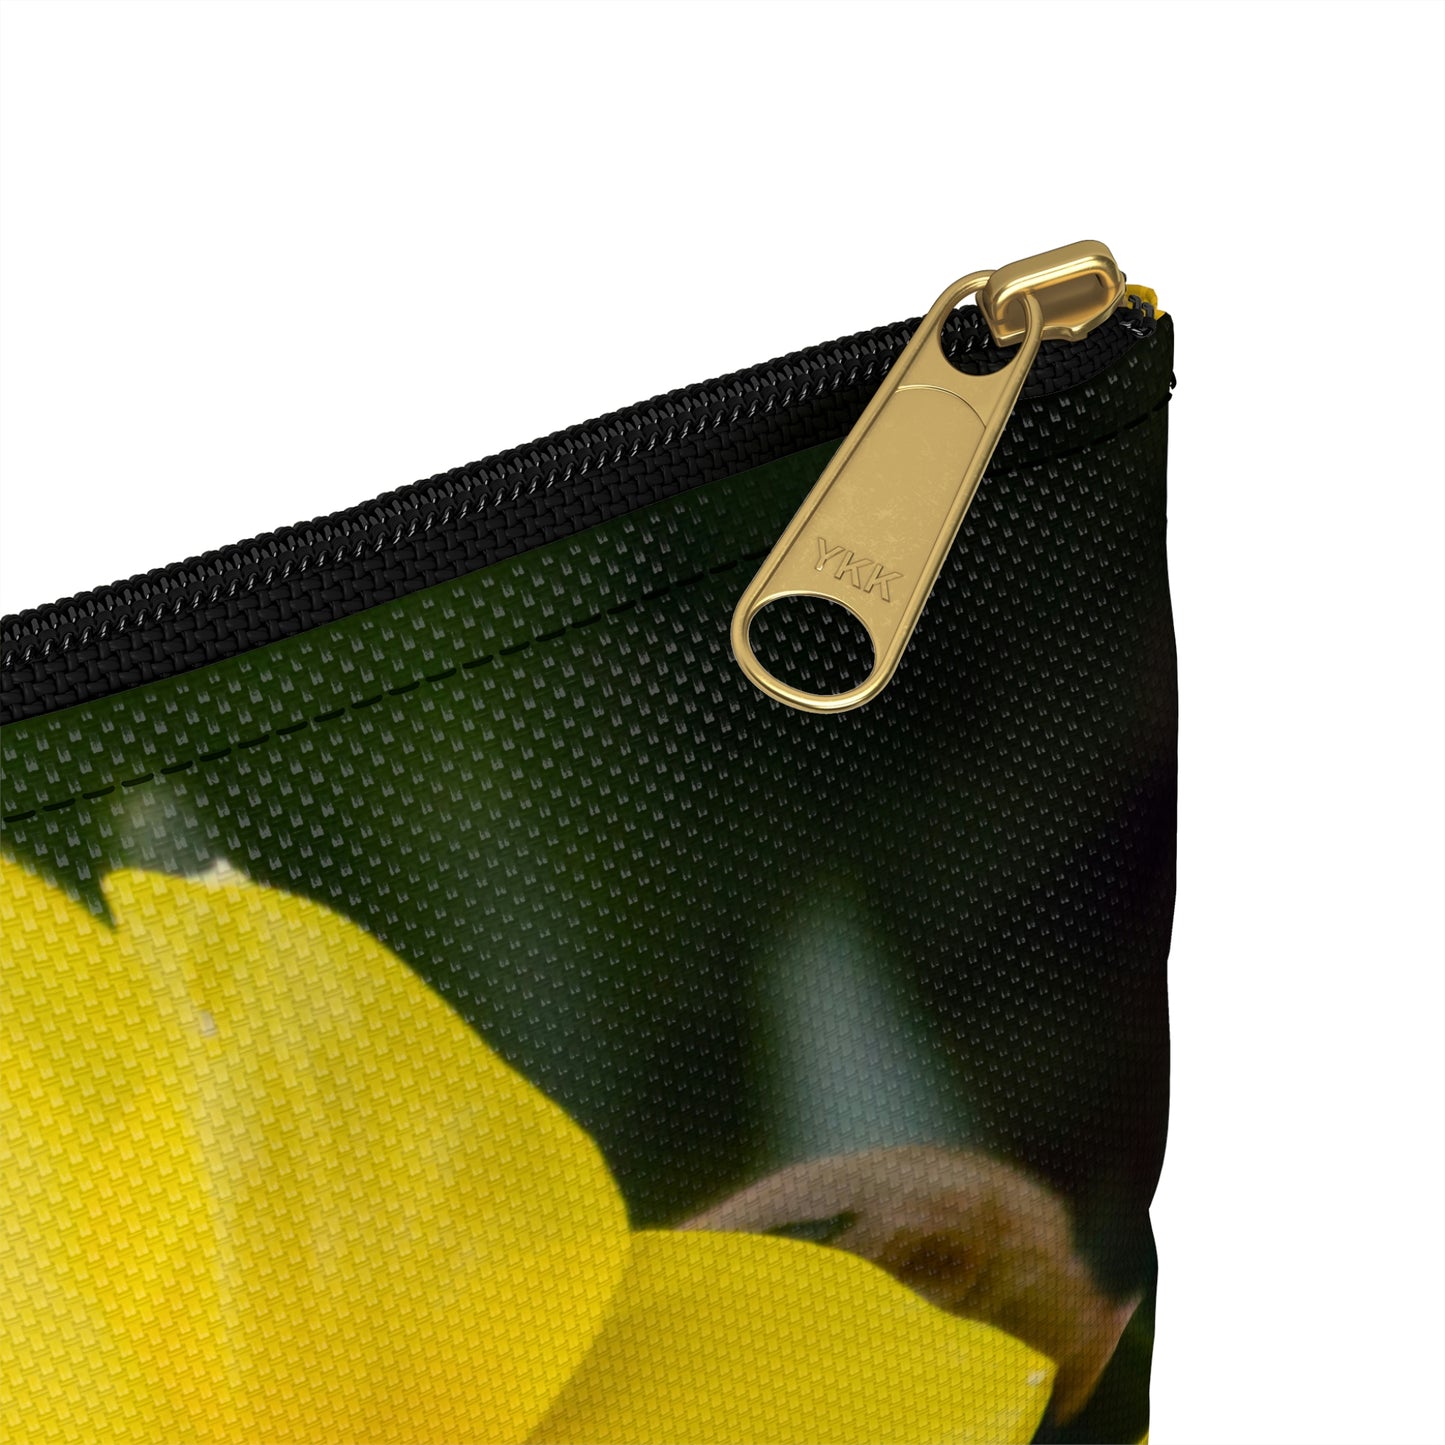 Flowers 10 Accessory Pouch